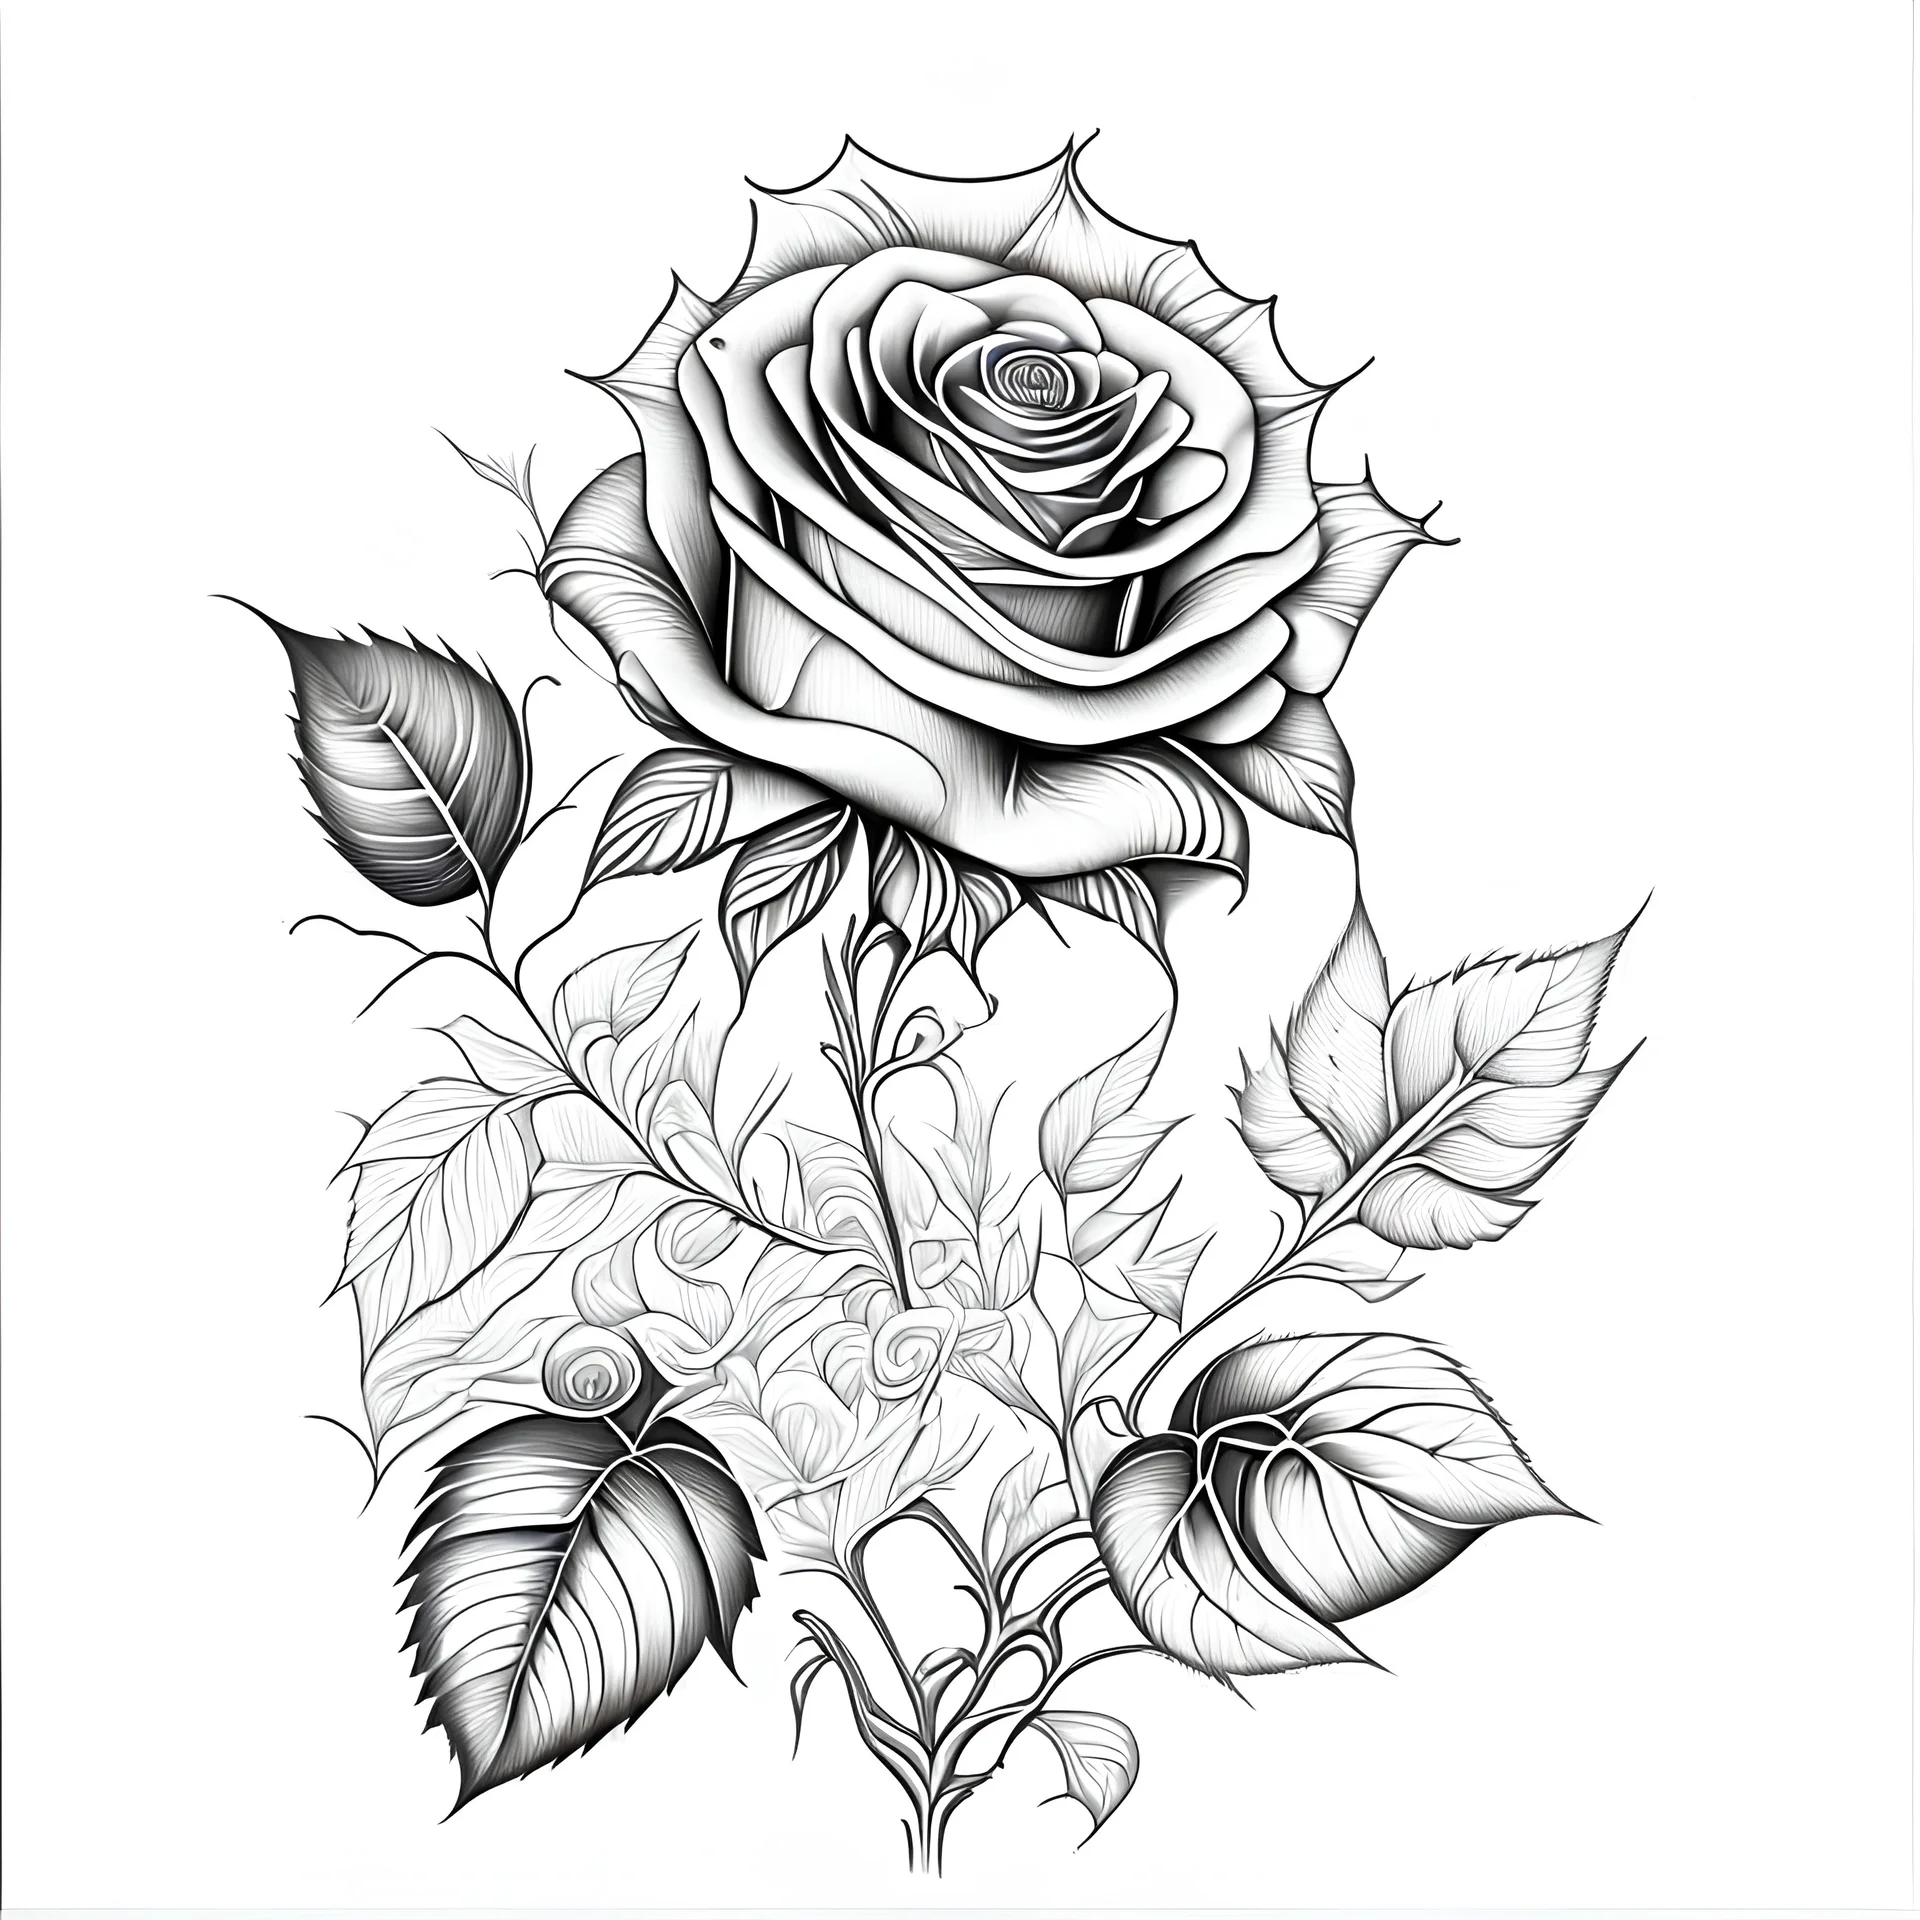 One line drawing garden rose with long stem Vector Image